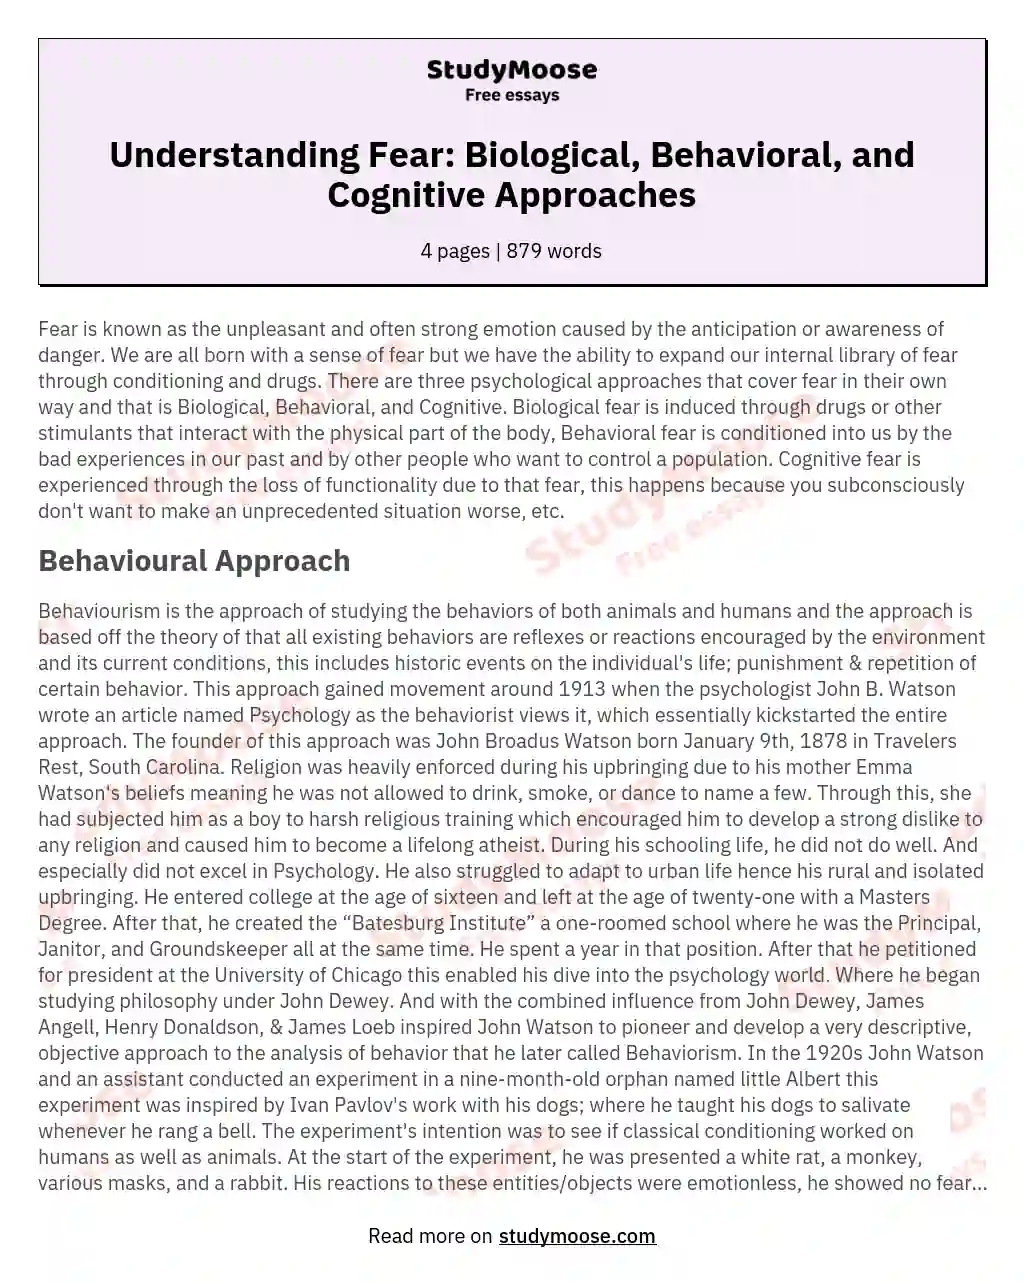 Understanding Fear: Biological, Behavioral, and Cognitive Approaches essay